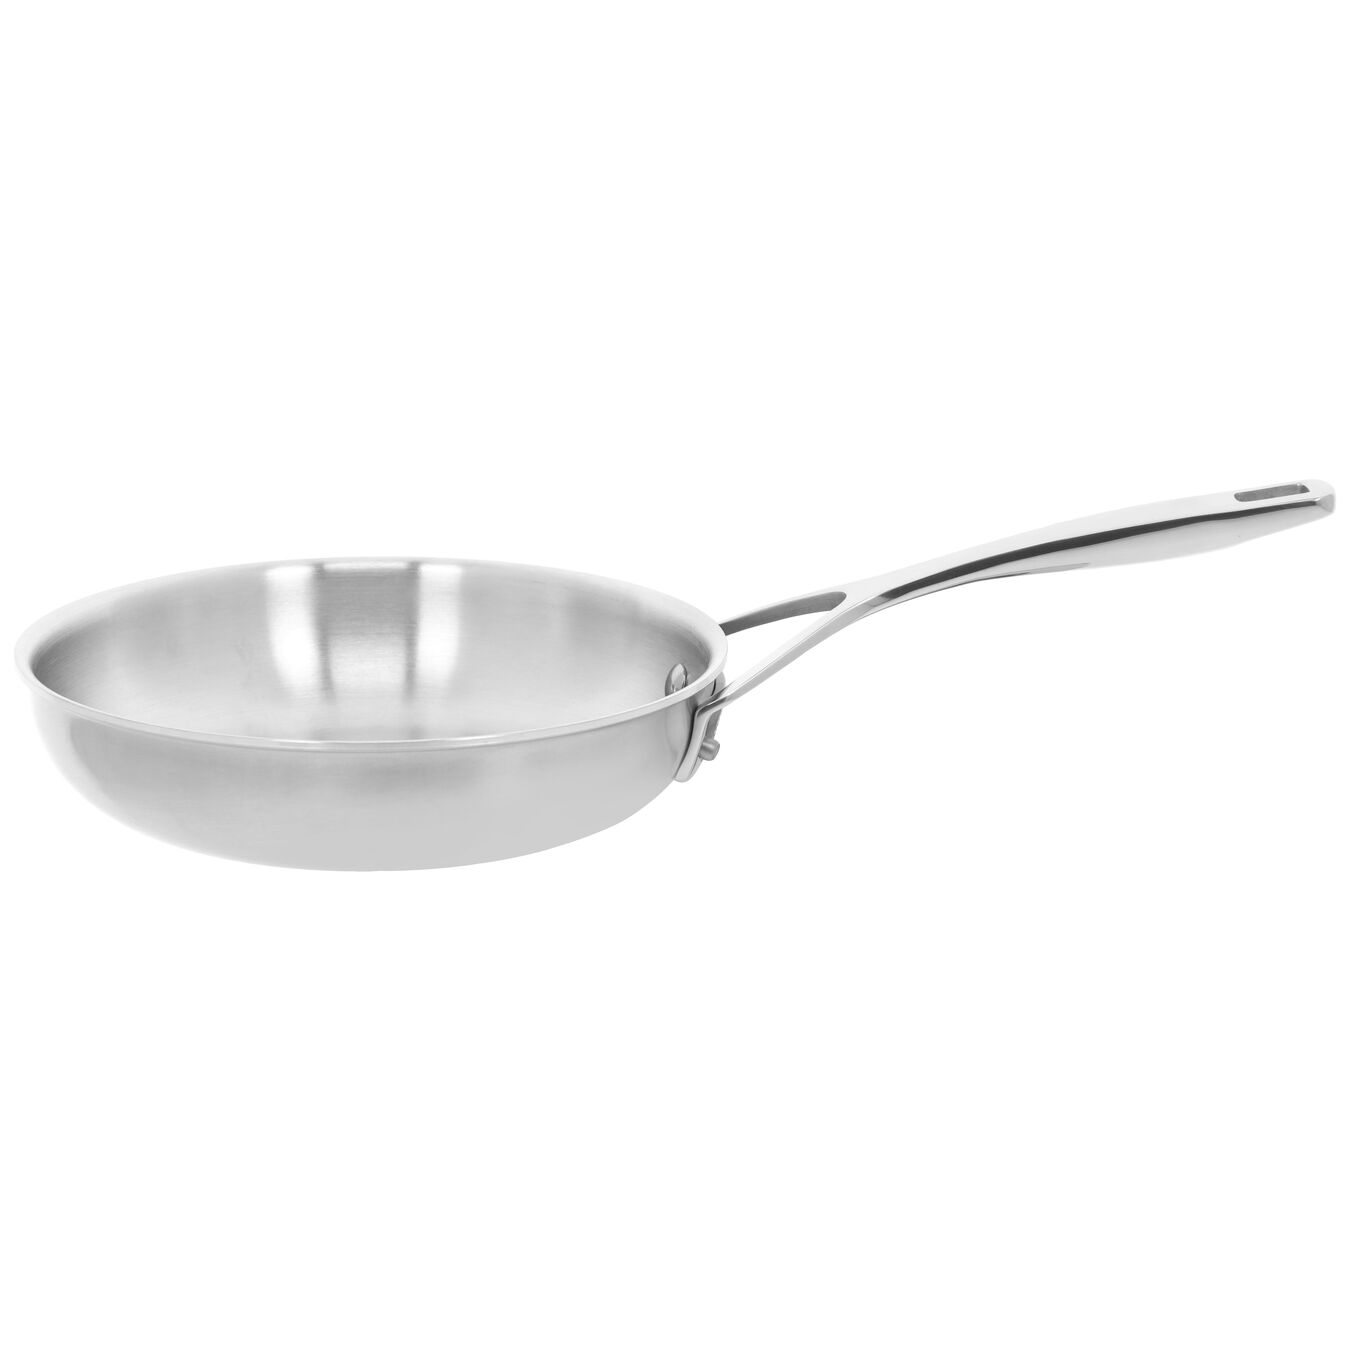 28 cm / 11 inch 18/10 Stainless Steel Frying pan,,large 2